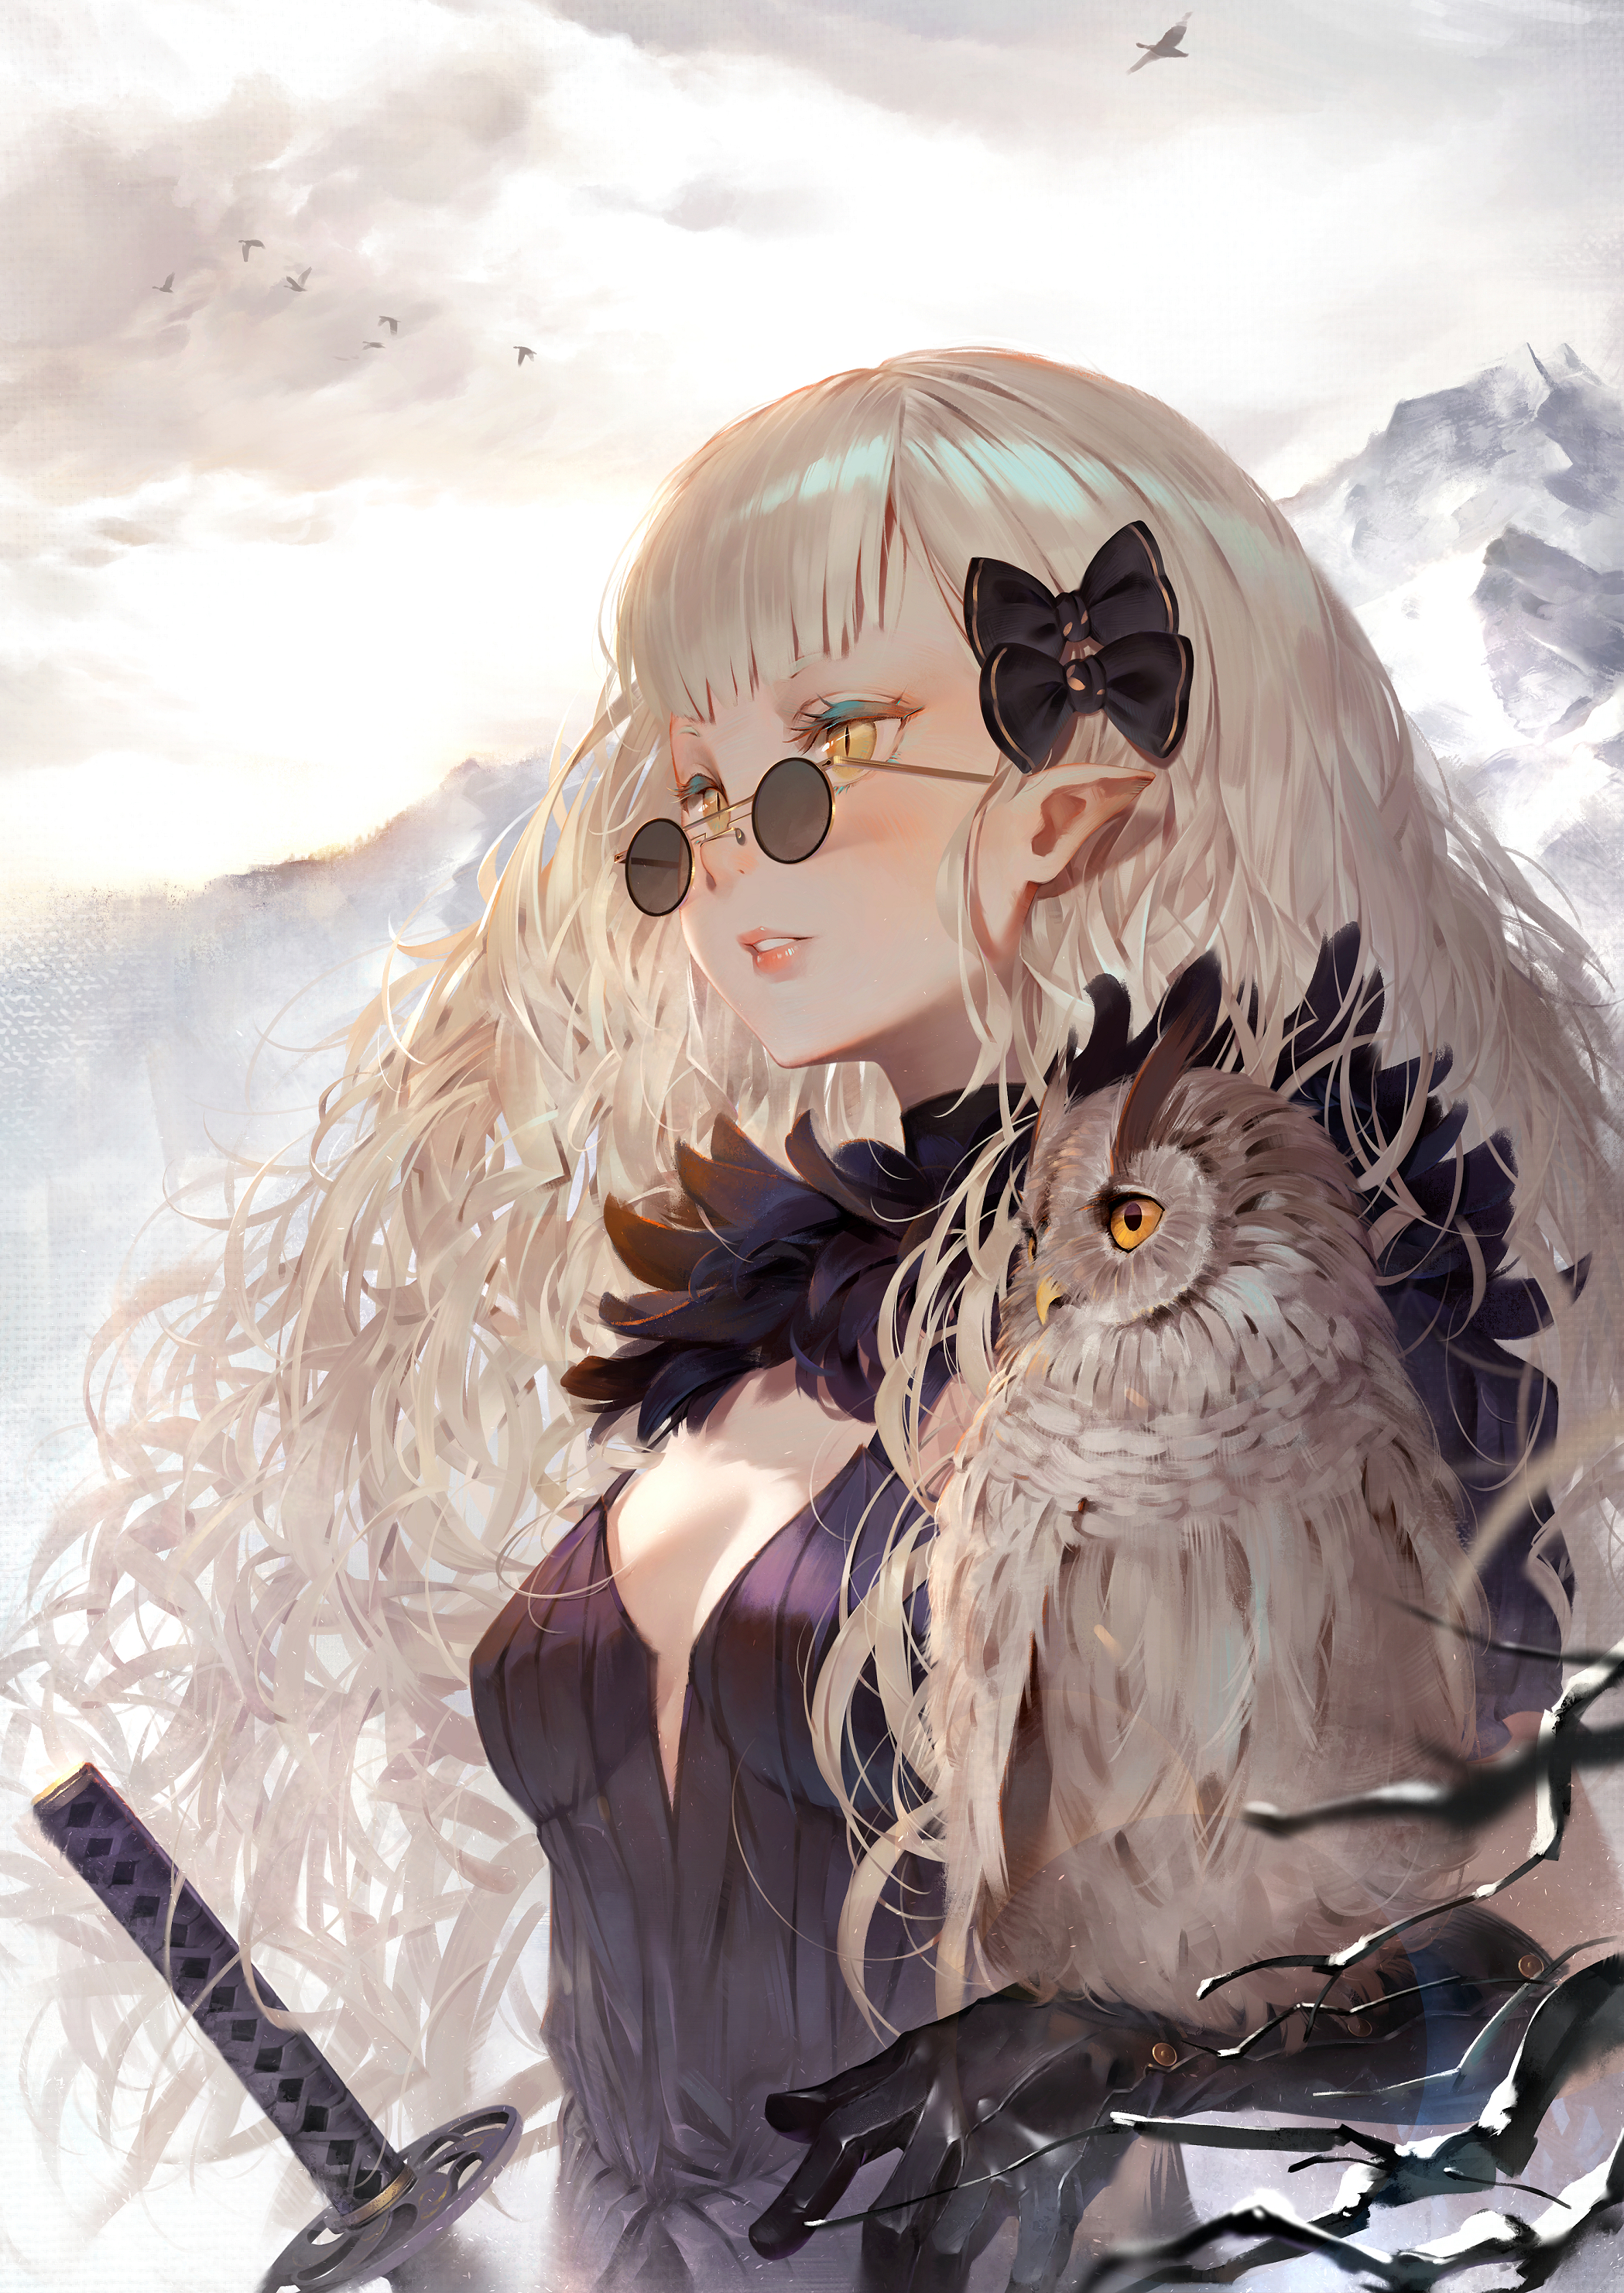 Anime 2098x2962 anime girls original characters artwork digital art 2D illustration drawing digital painting fantasy art fantasy girl women women with glasses looking away blonde long hair cleavage mountains owl birds katana gloves pointy ears portrait portrait display anime clouds Chika Toriumi blushing hair bows